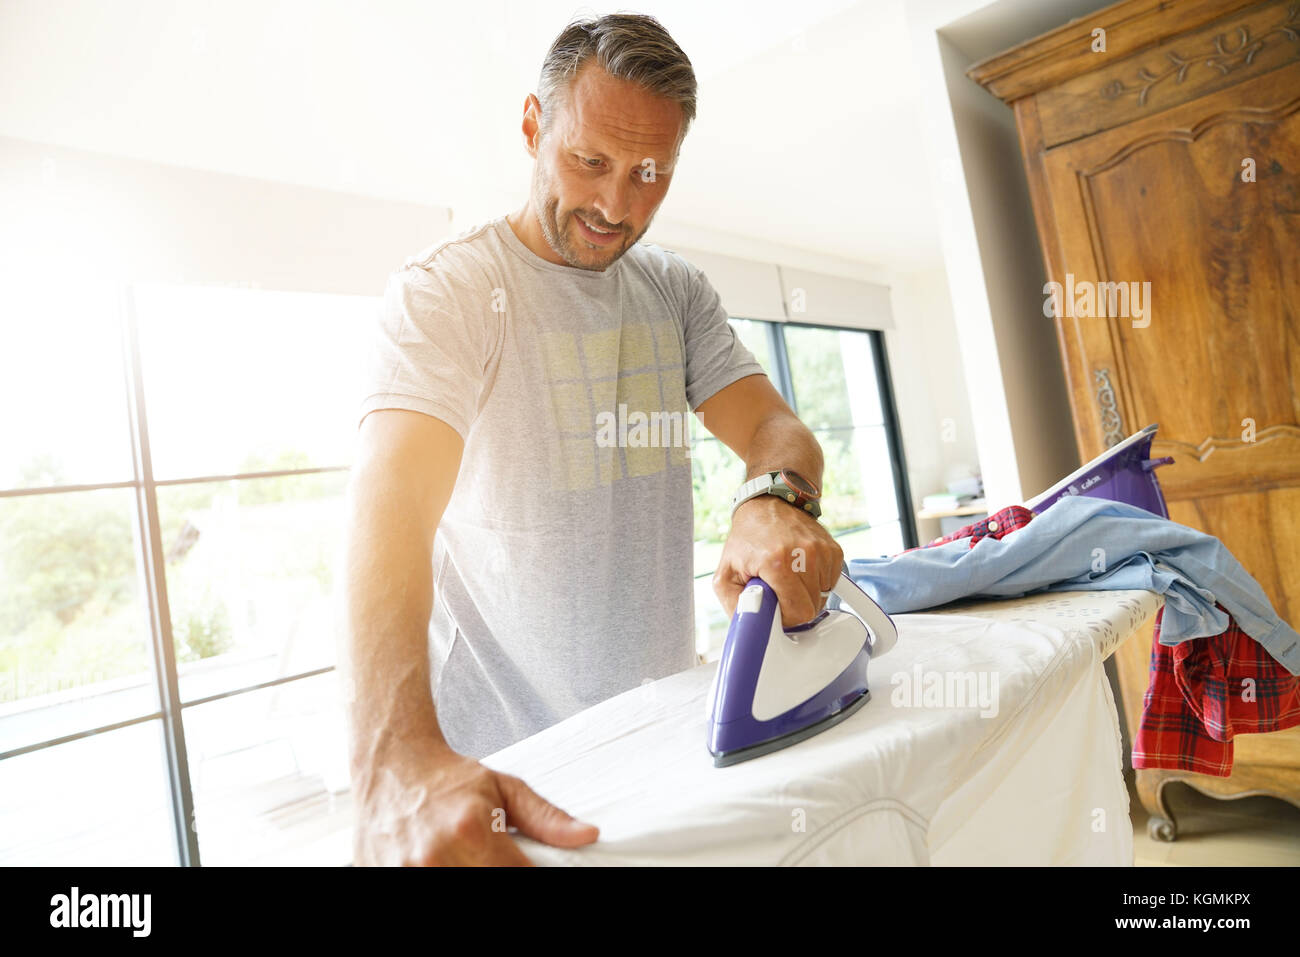 Man At Home Ironing Clothes Stock Photo Alamy